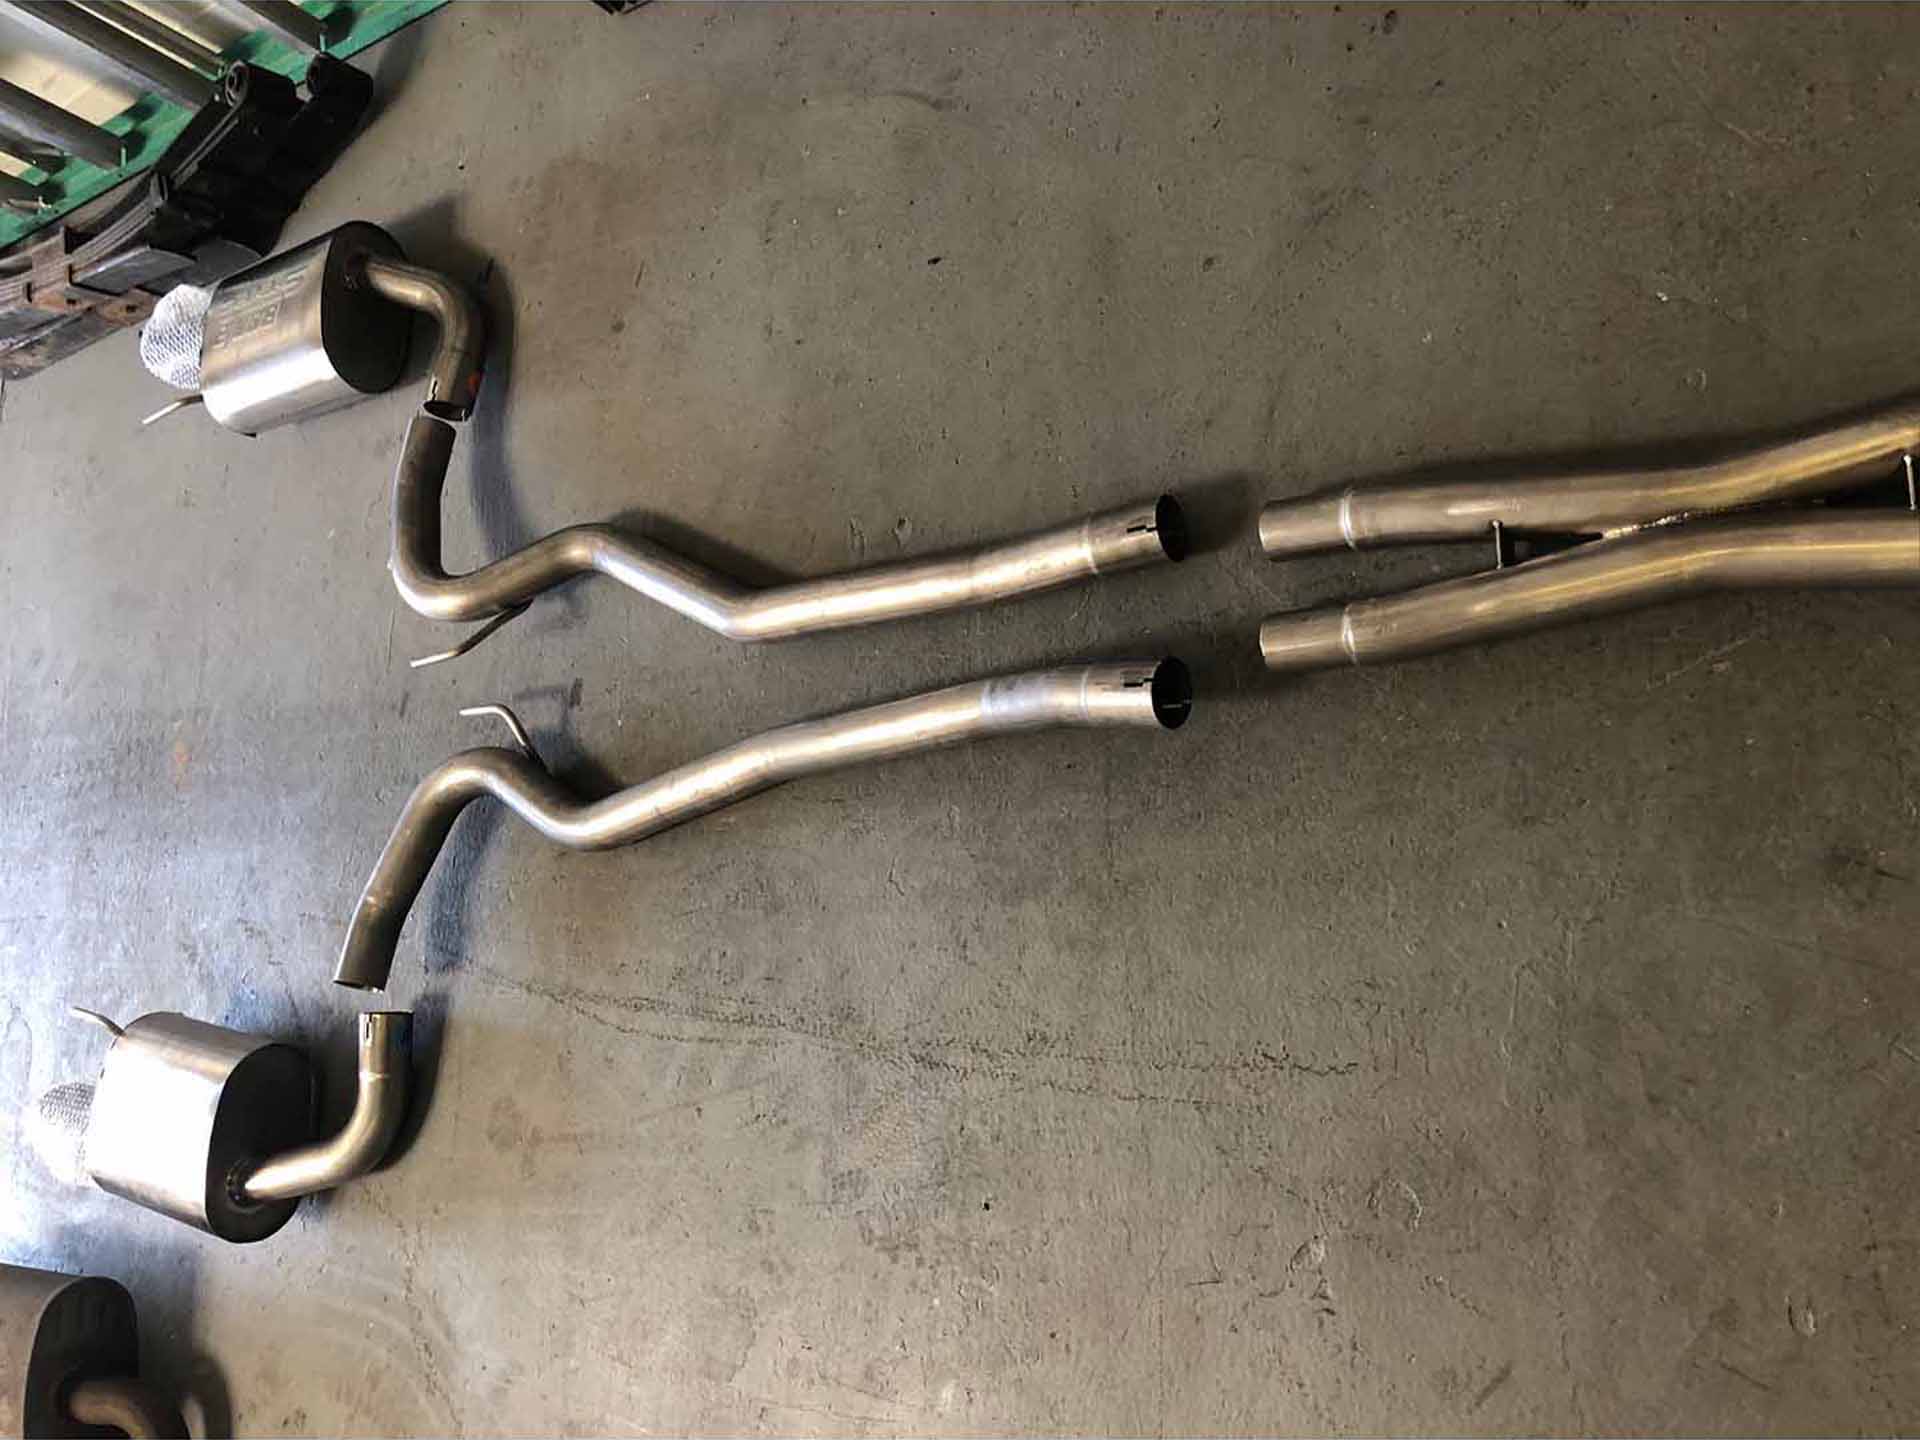 Mustang 5-0 Muffler After pipes